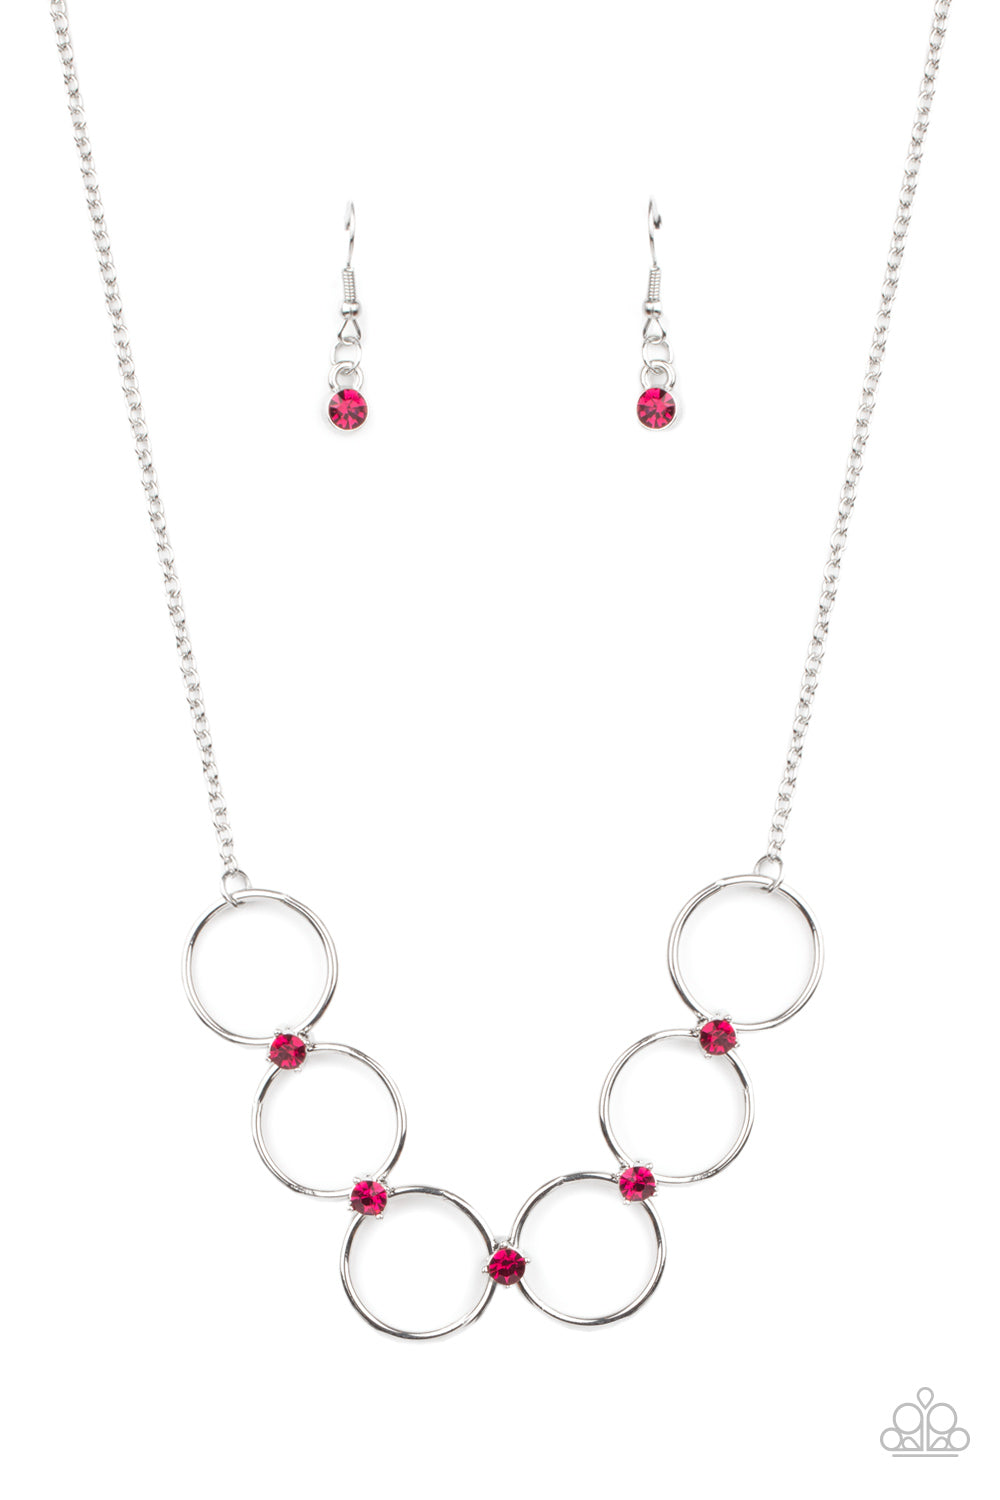 Regal Society - Pink Paparazzi Necklace